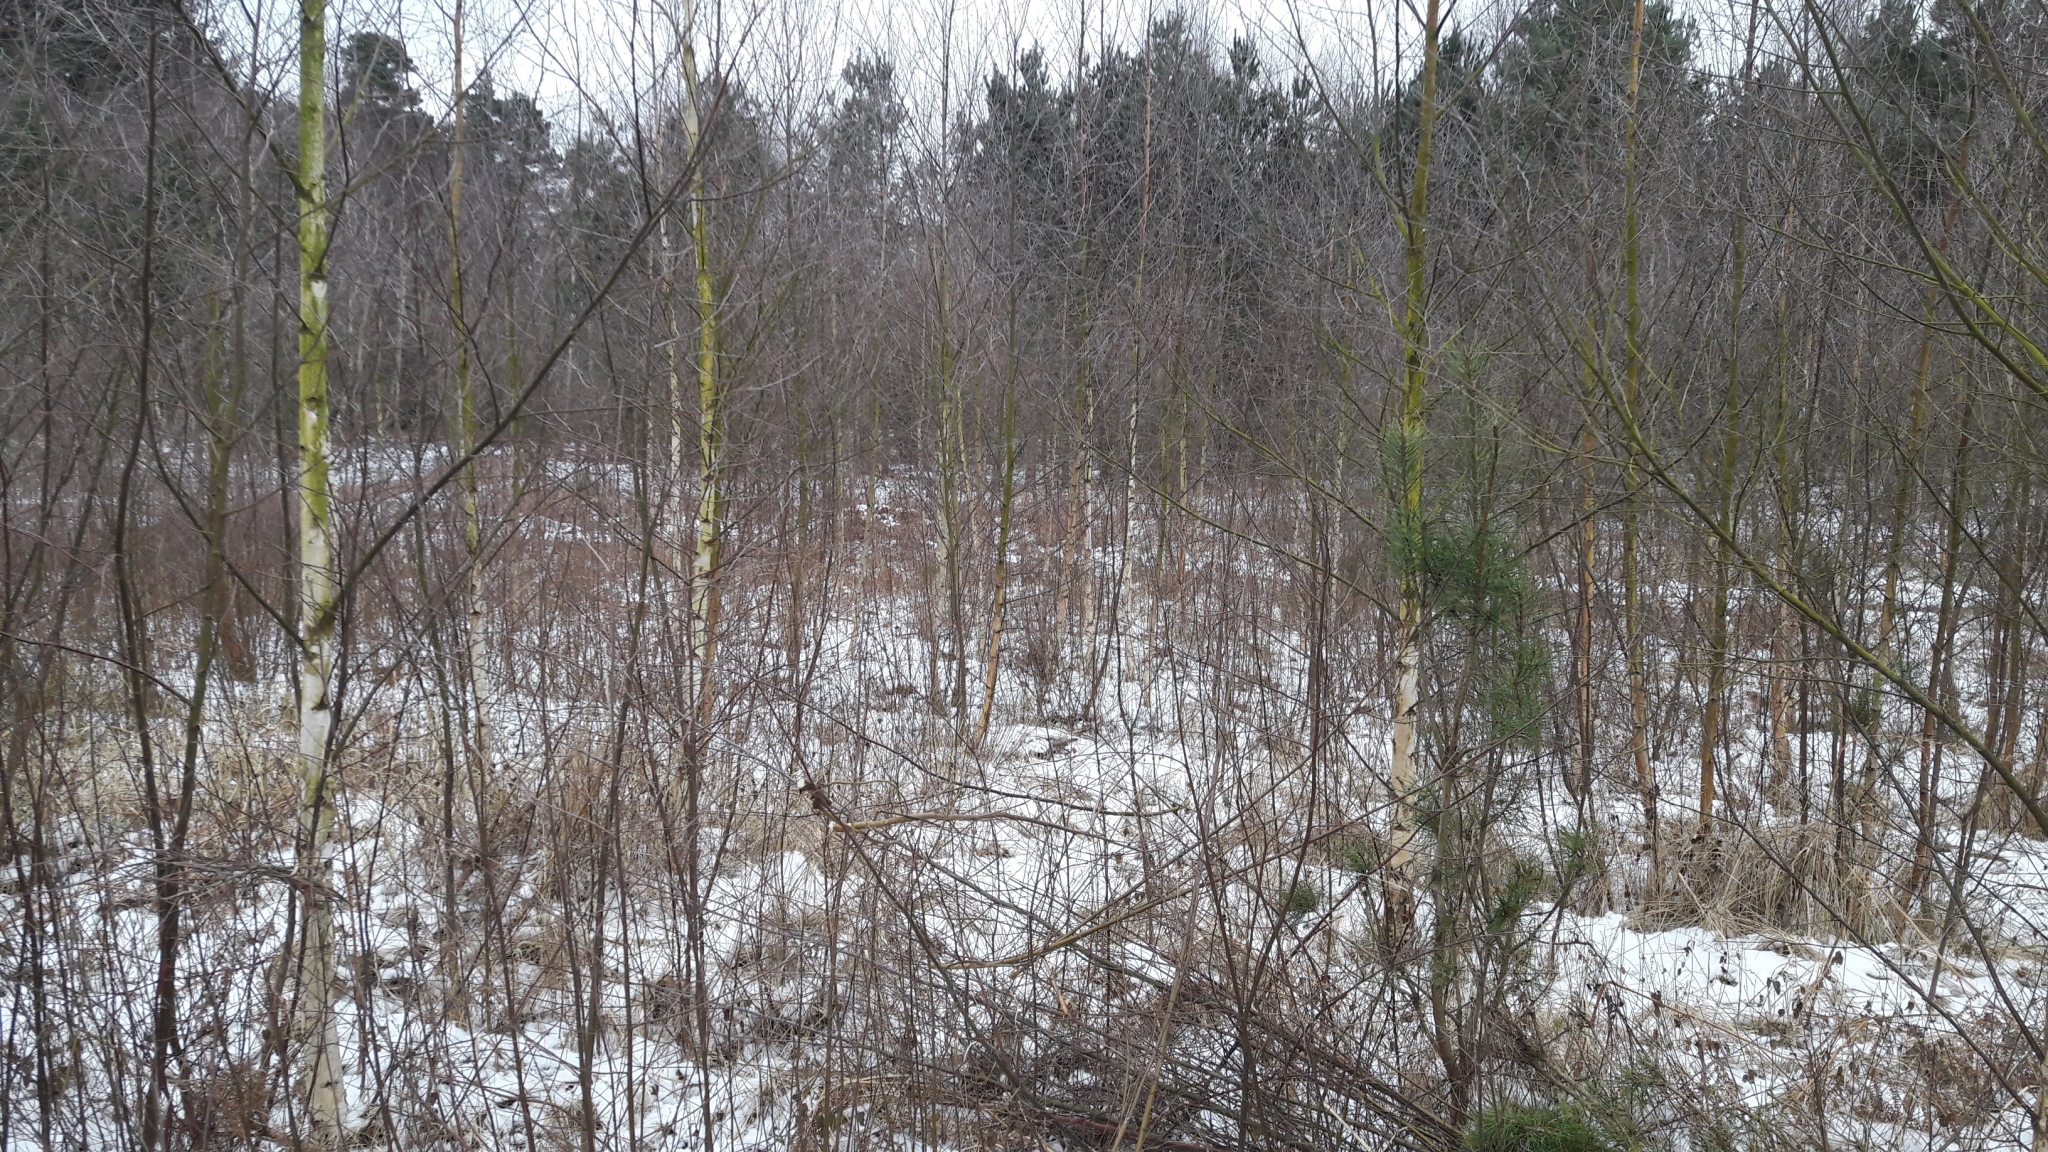 A photo from the FoTF Conservation Event - March 2018 - Birch Coppicing at High Lodge : A shot into the Birch trees at the work site